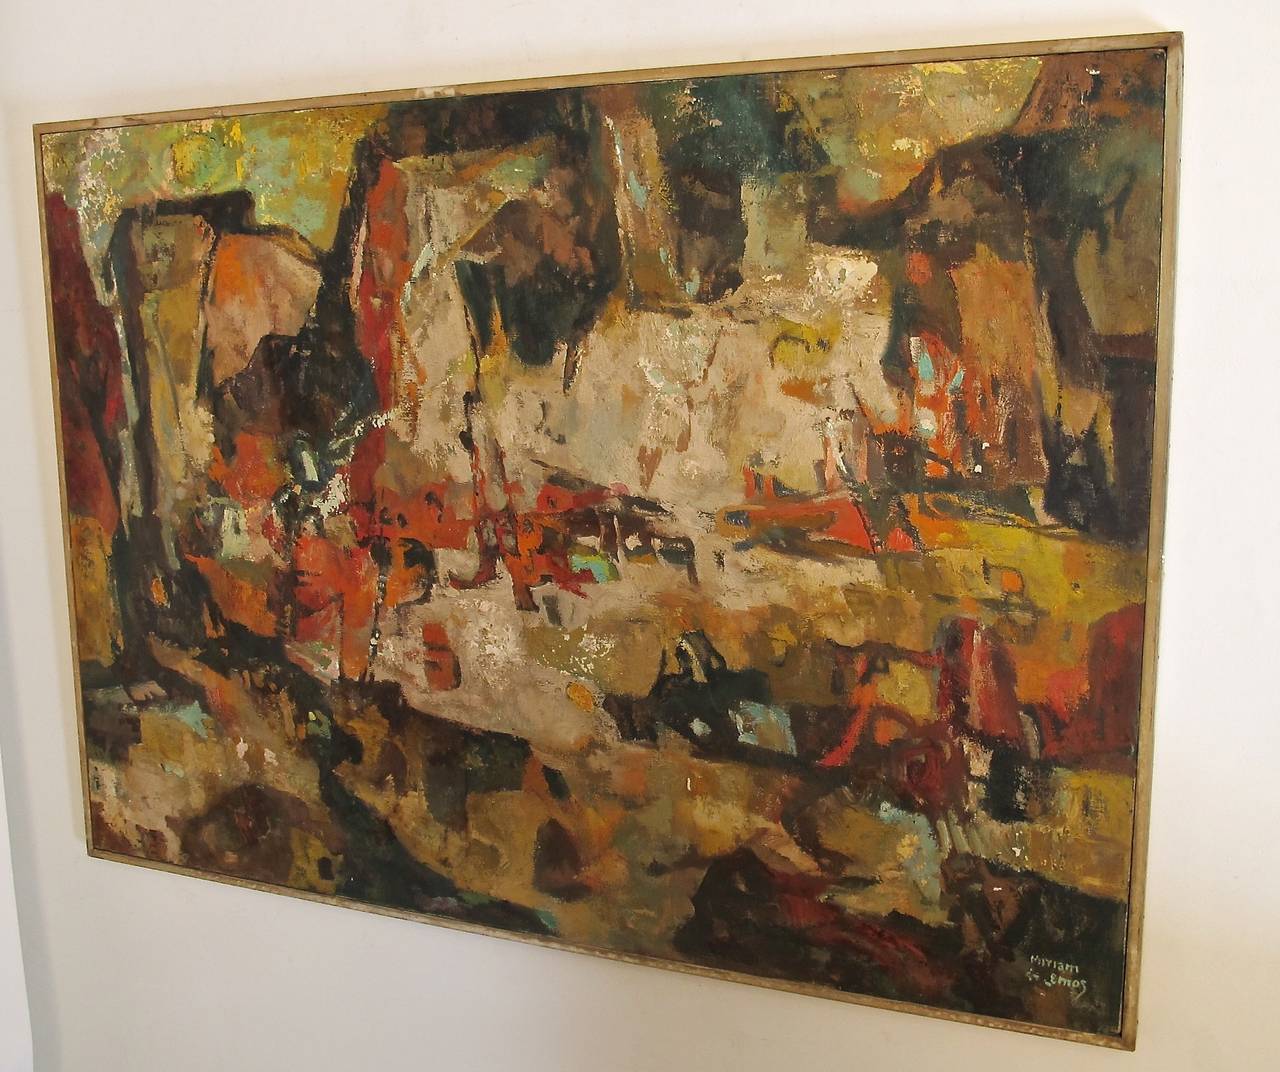 A large abstract oil on canvas by California artist Mariam de Lemos (b. 1895-d.1968), titled 